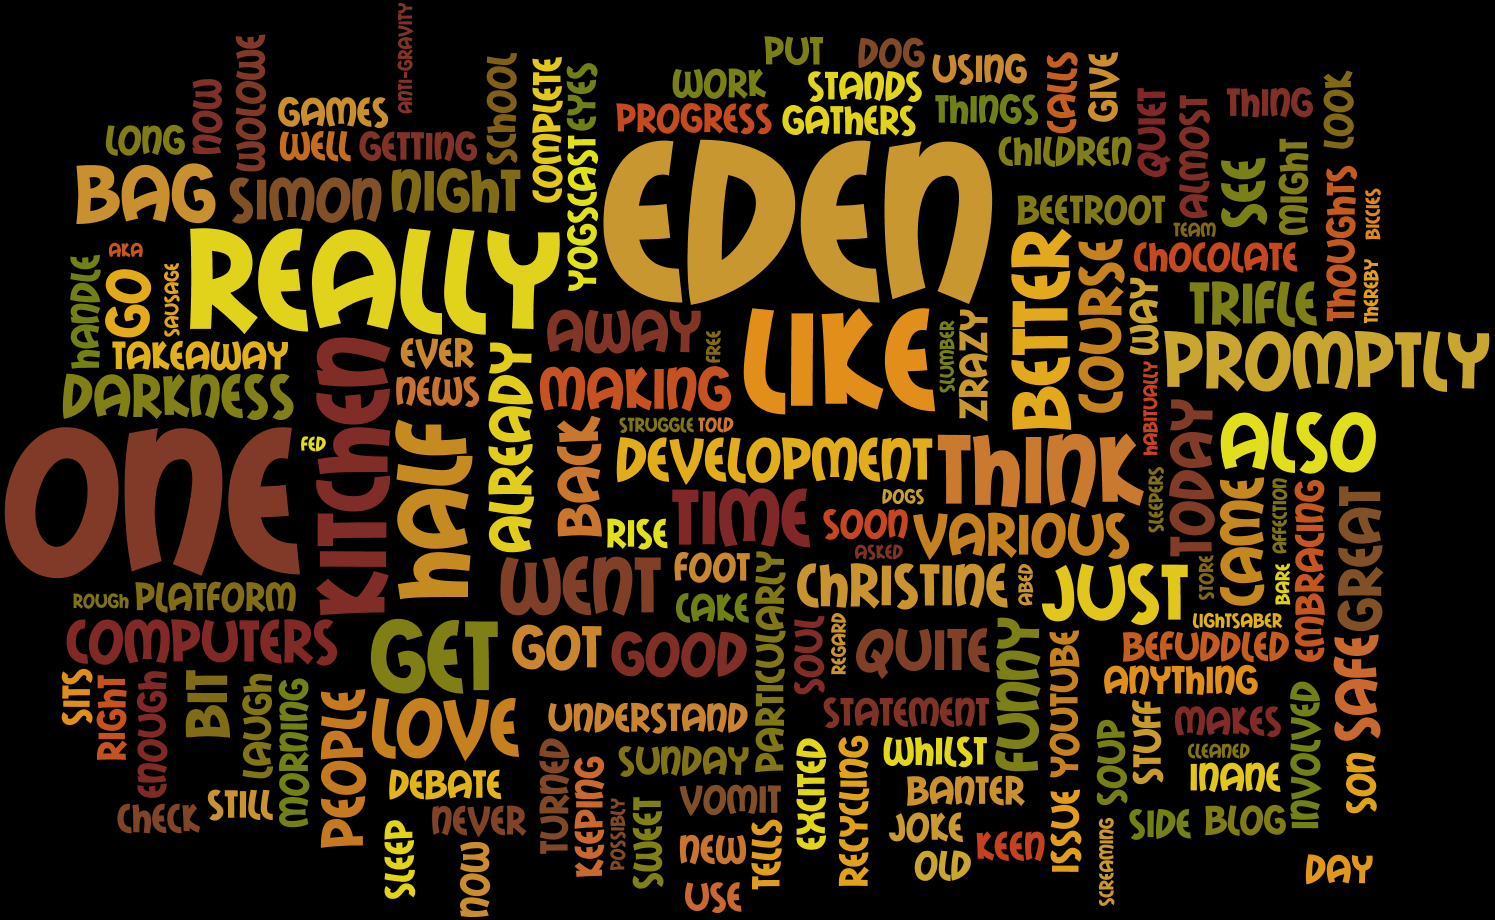 wordle for thoggy.blogspot.com